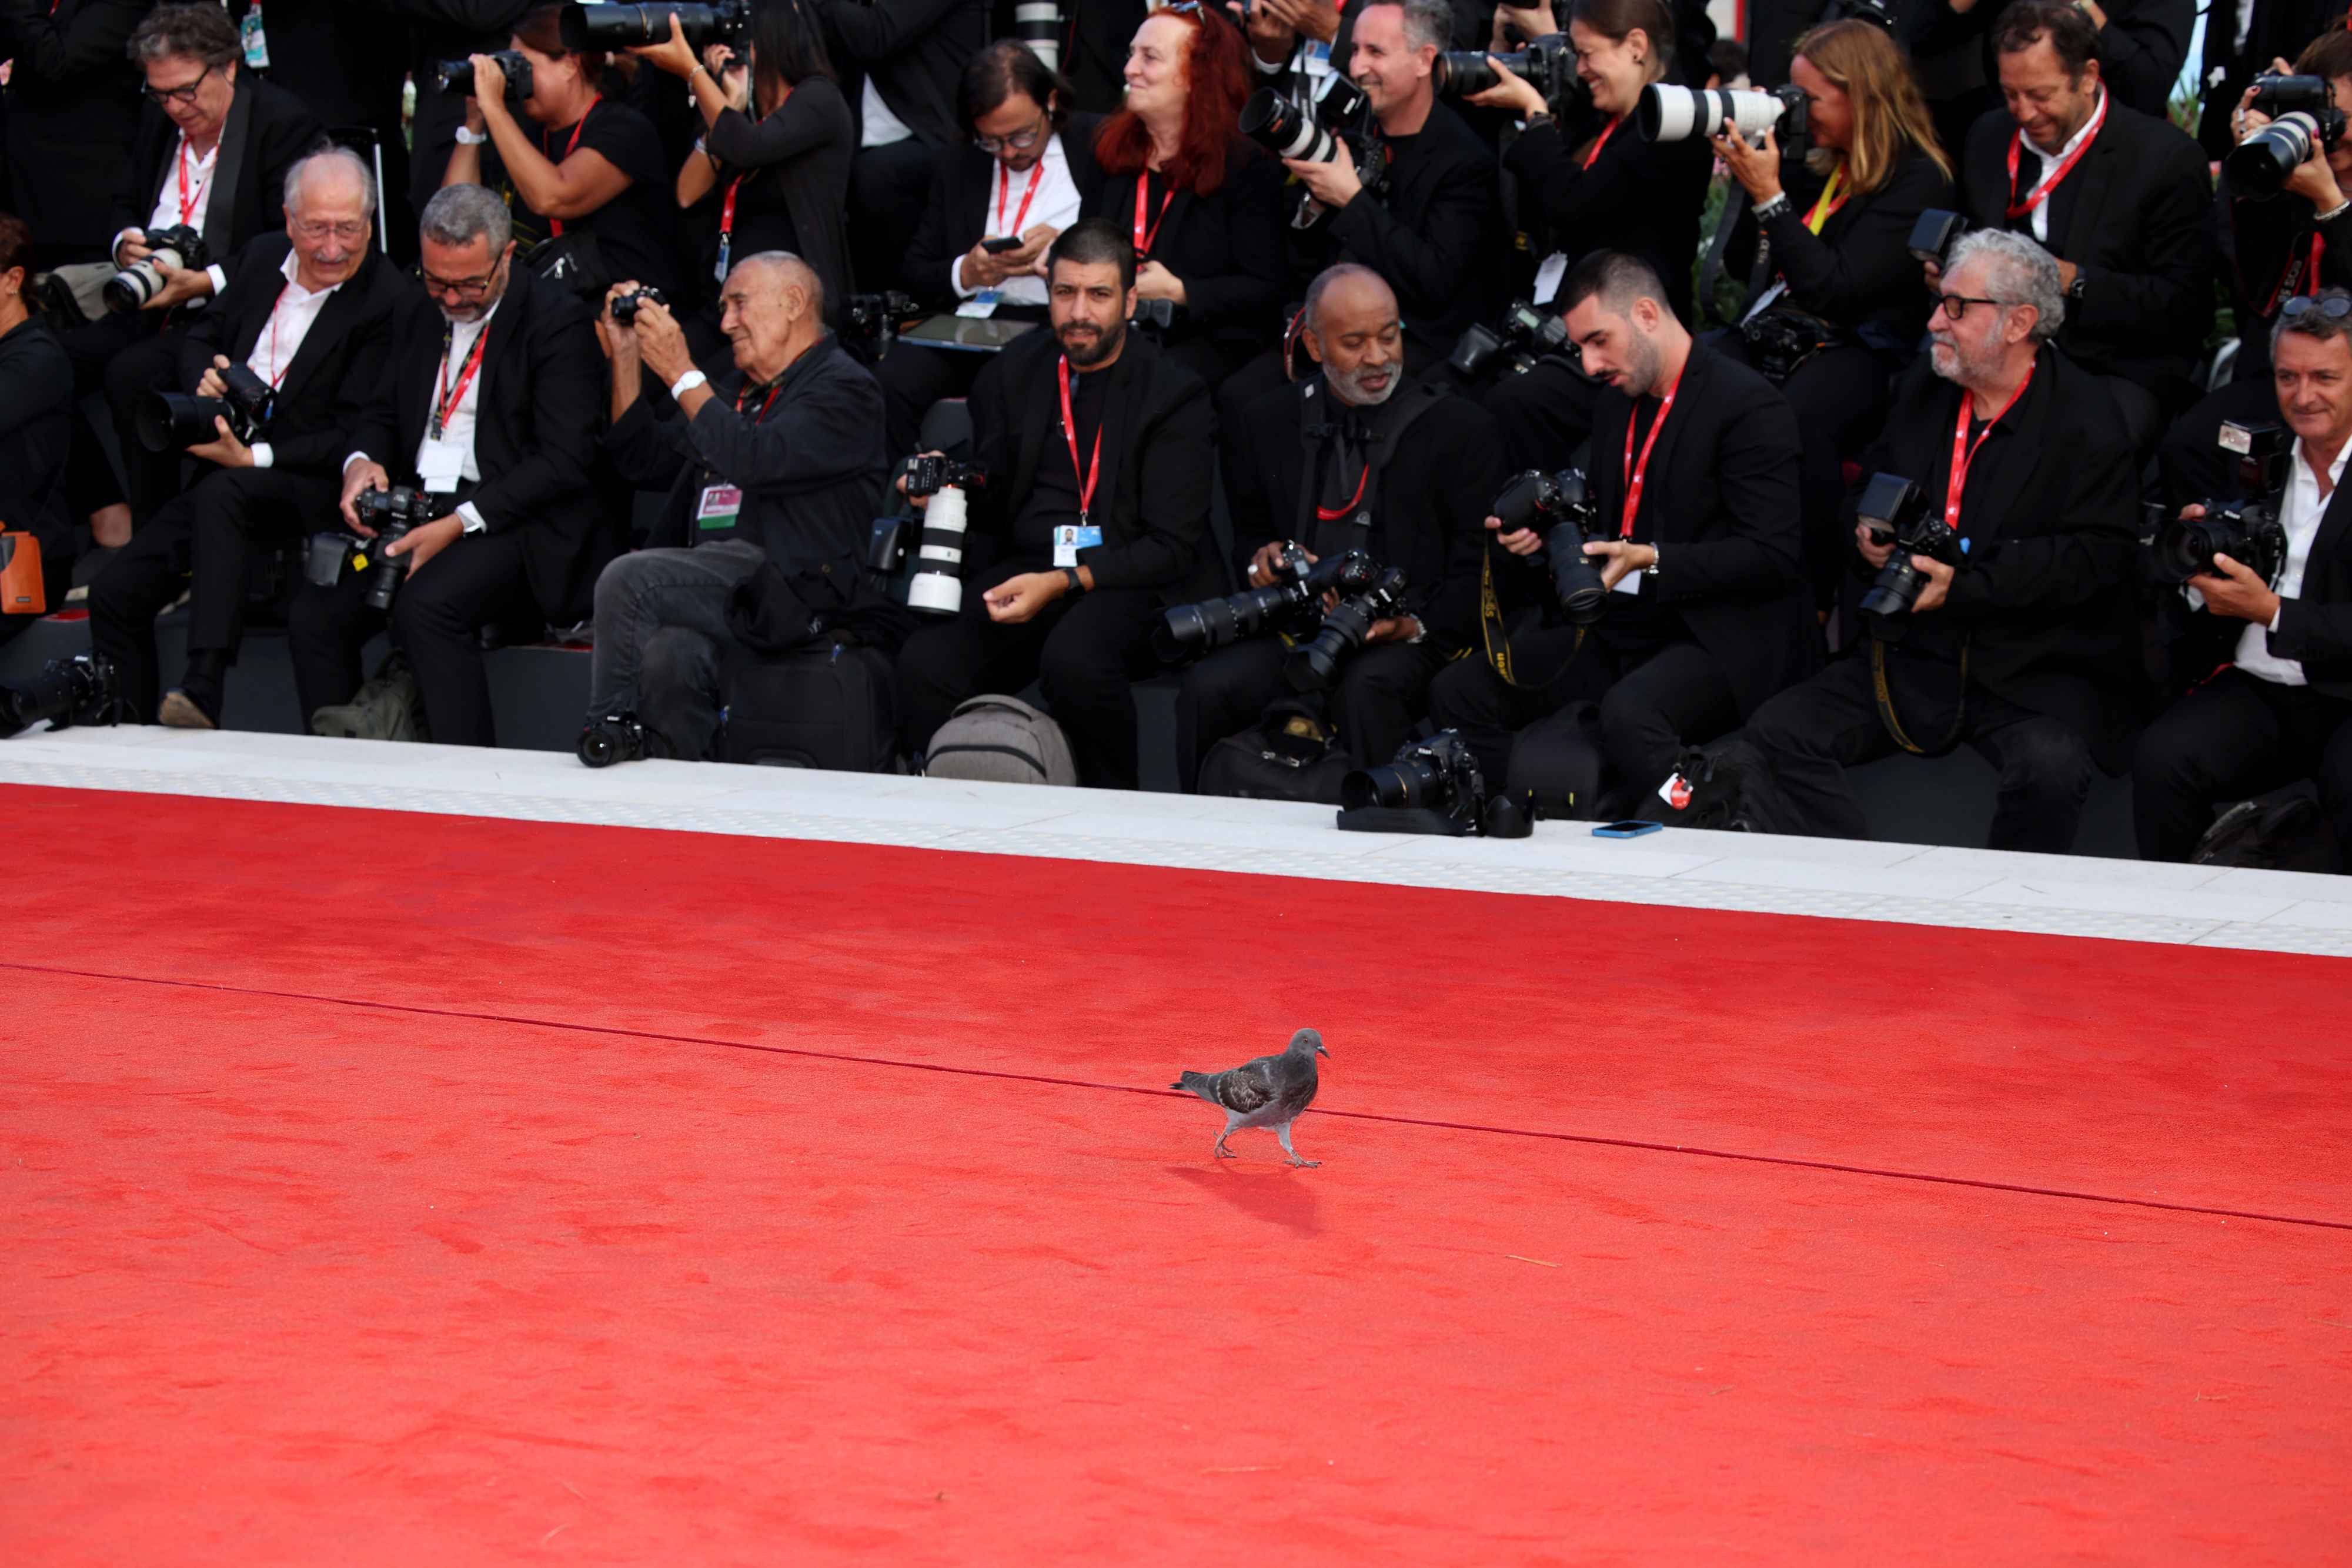 The pigeon on the red carpet